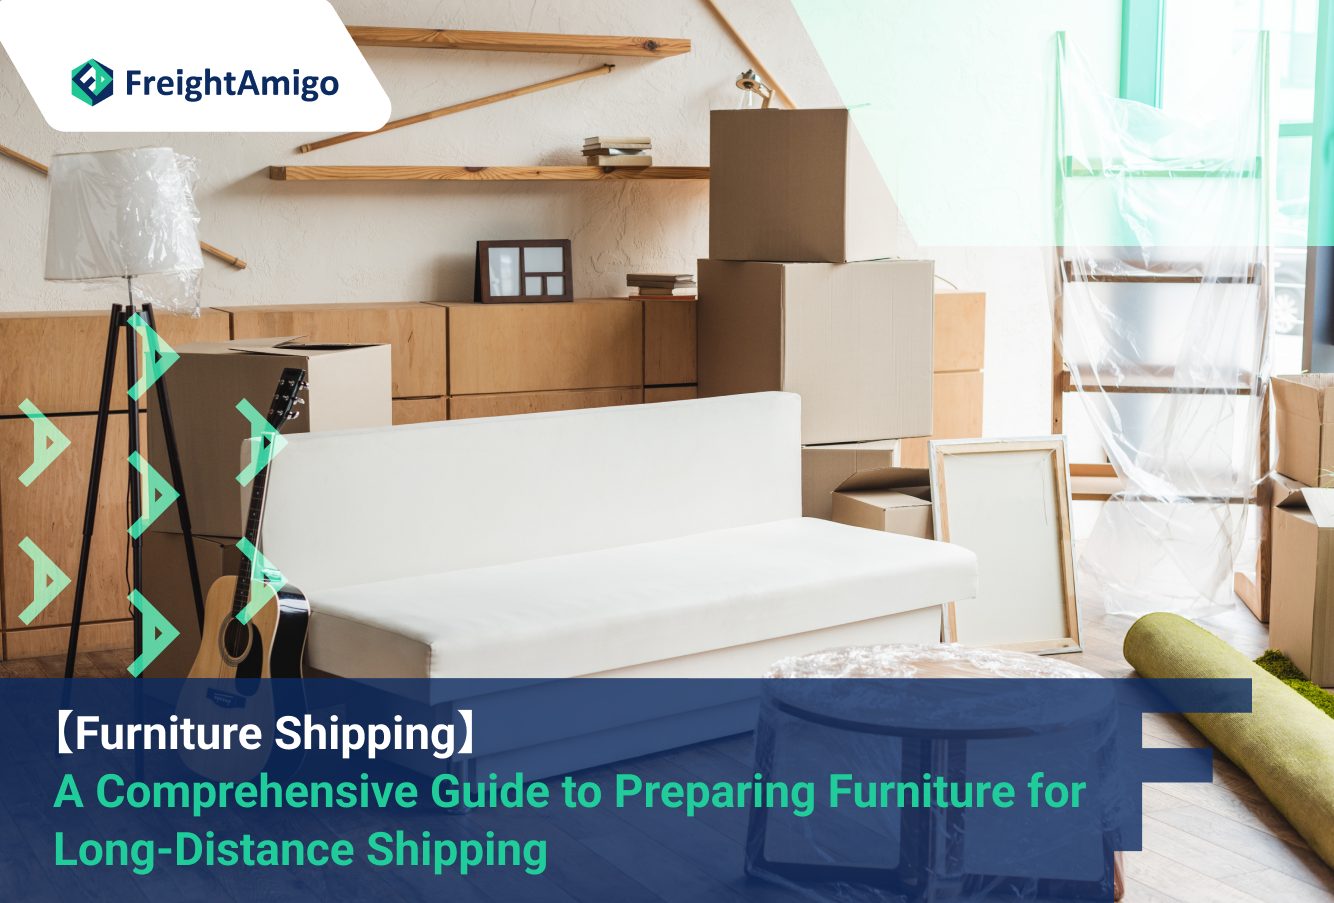 【Furniture Shipping】 A Comprehensive Guide to Preparing Furniture for Long-Distance Shipping